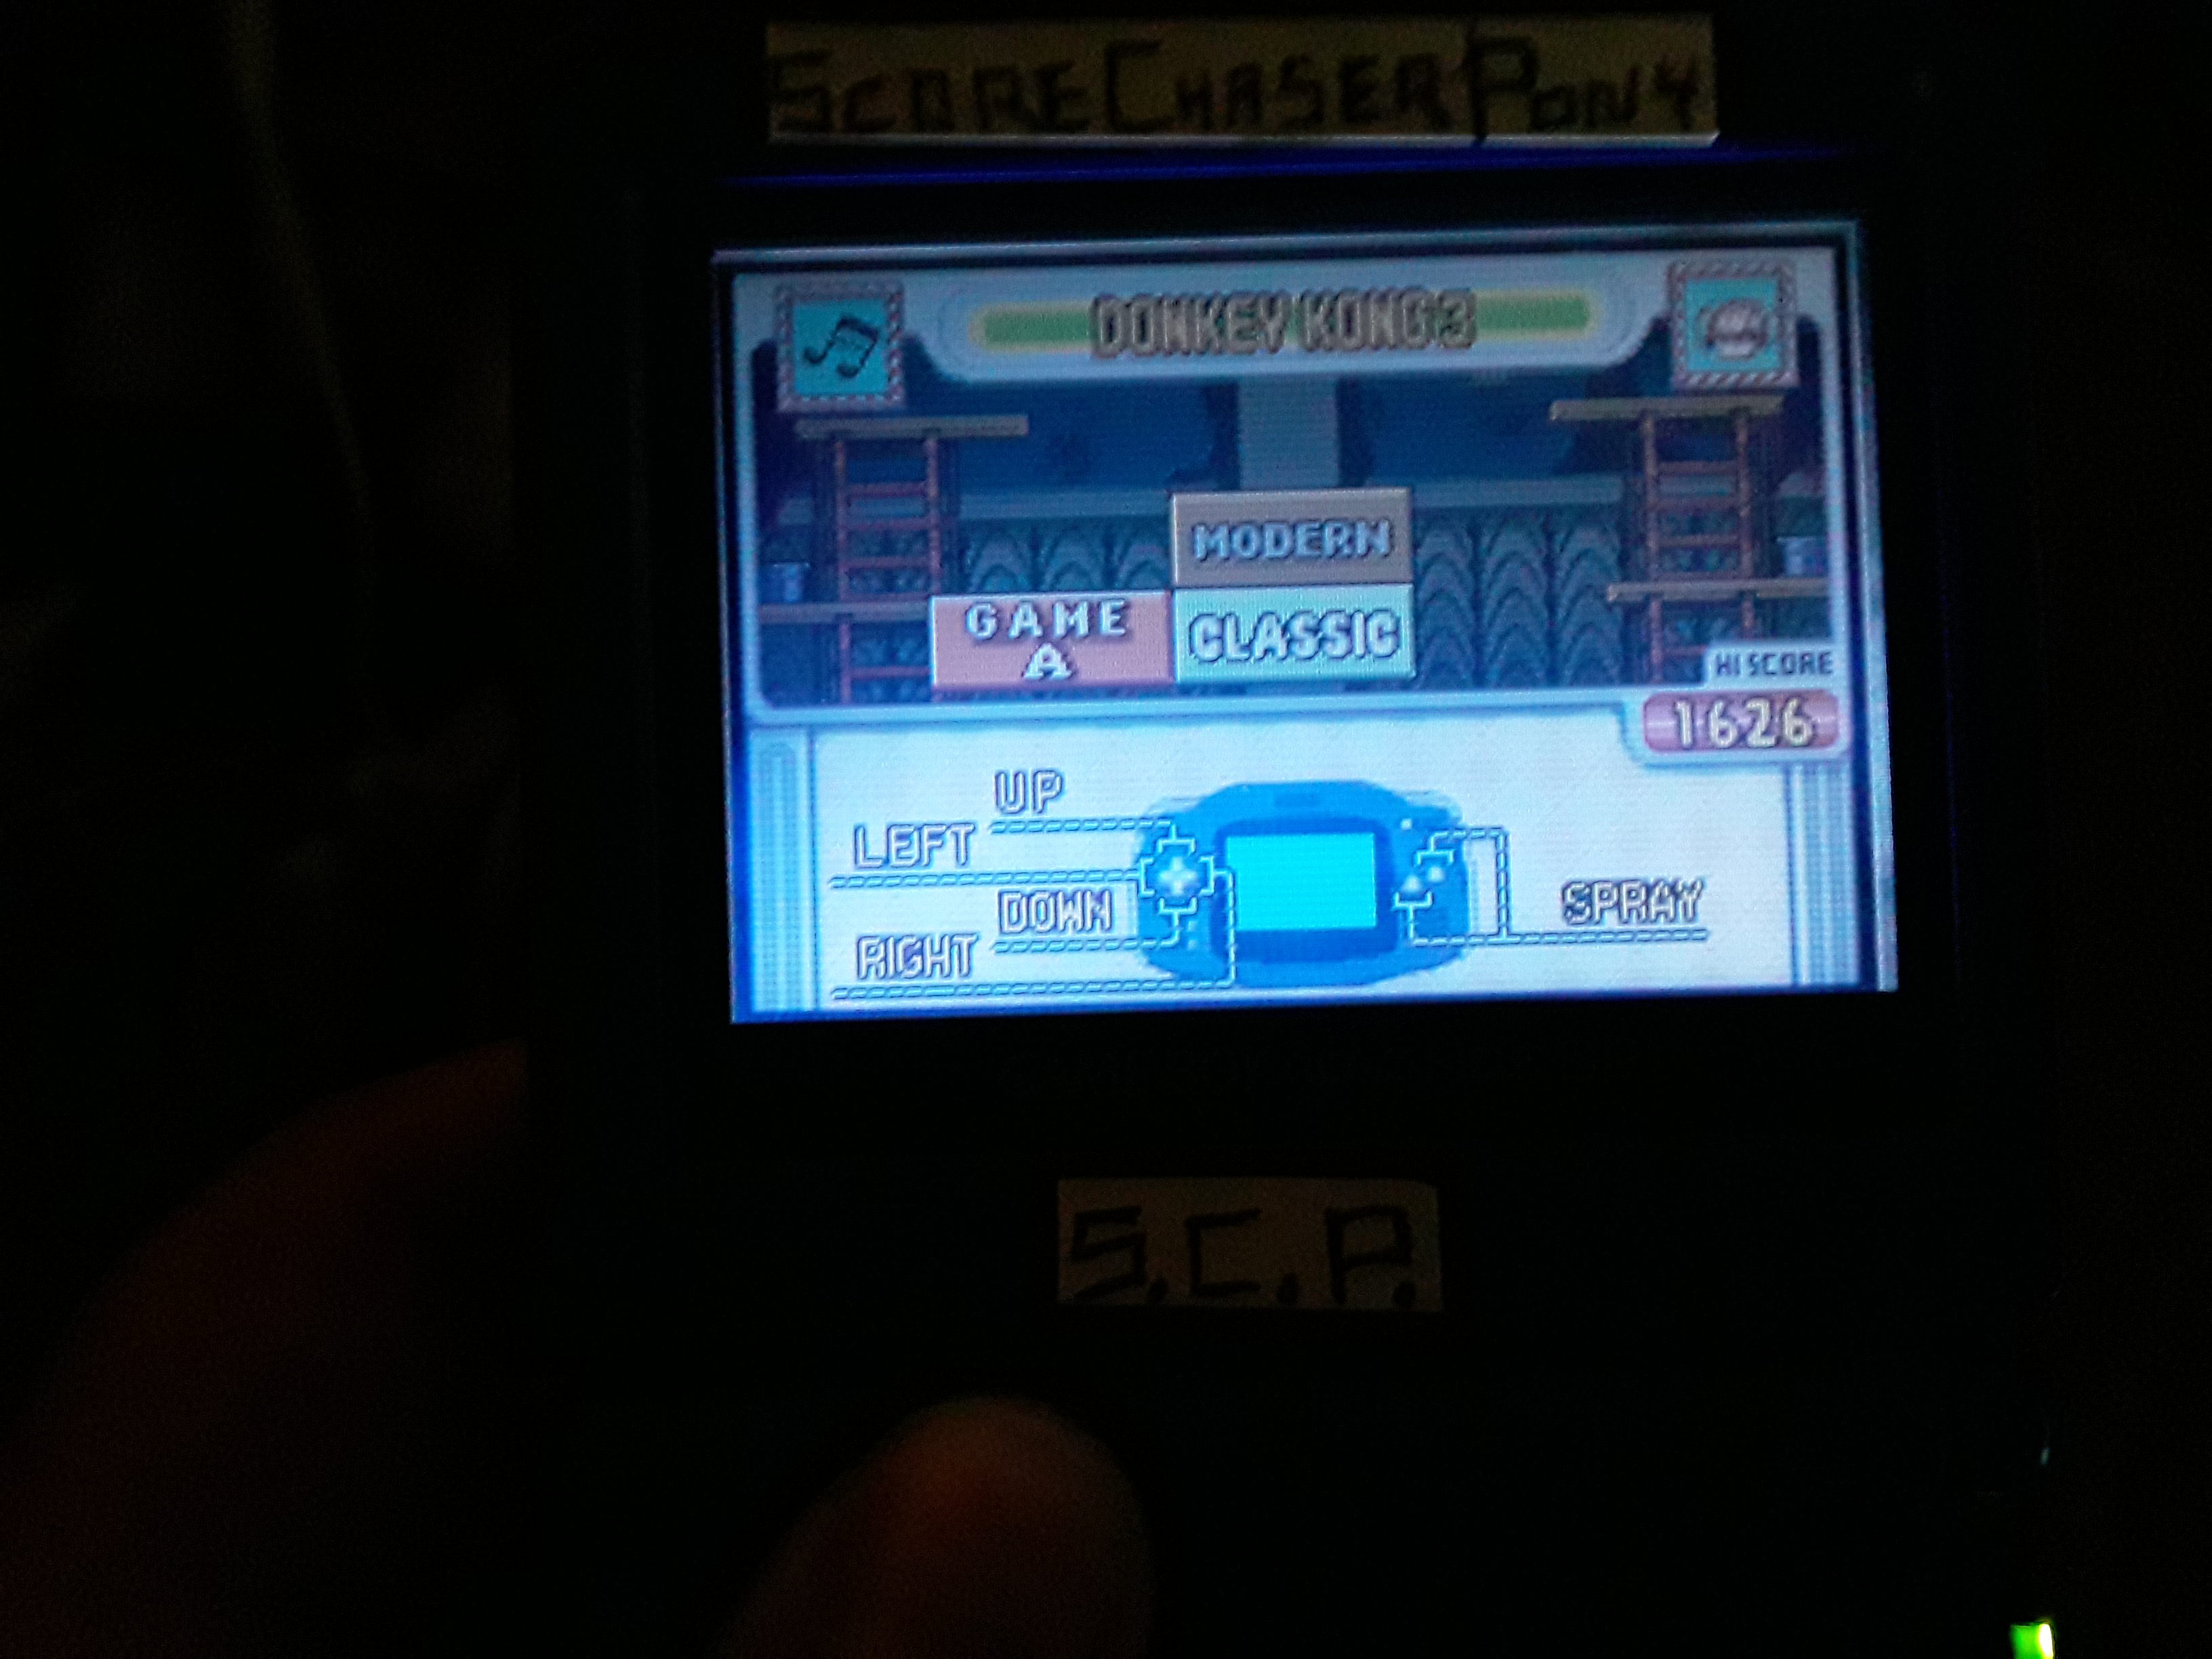 Game & Watch Gallery 4: Donkey Kong 3 [Classic: Game A] 1,626 points